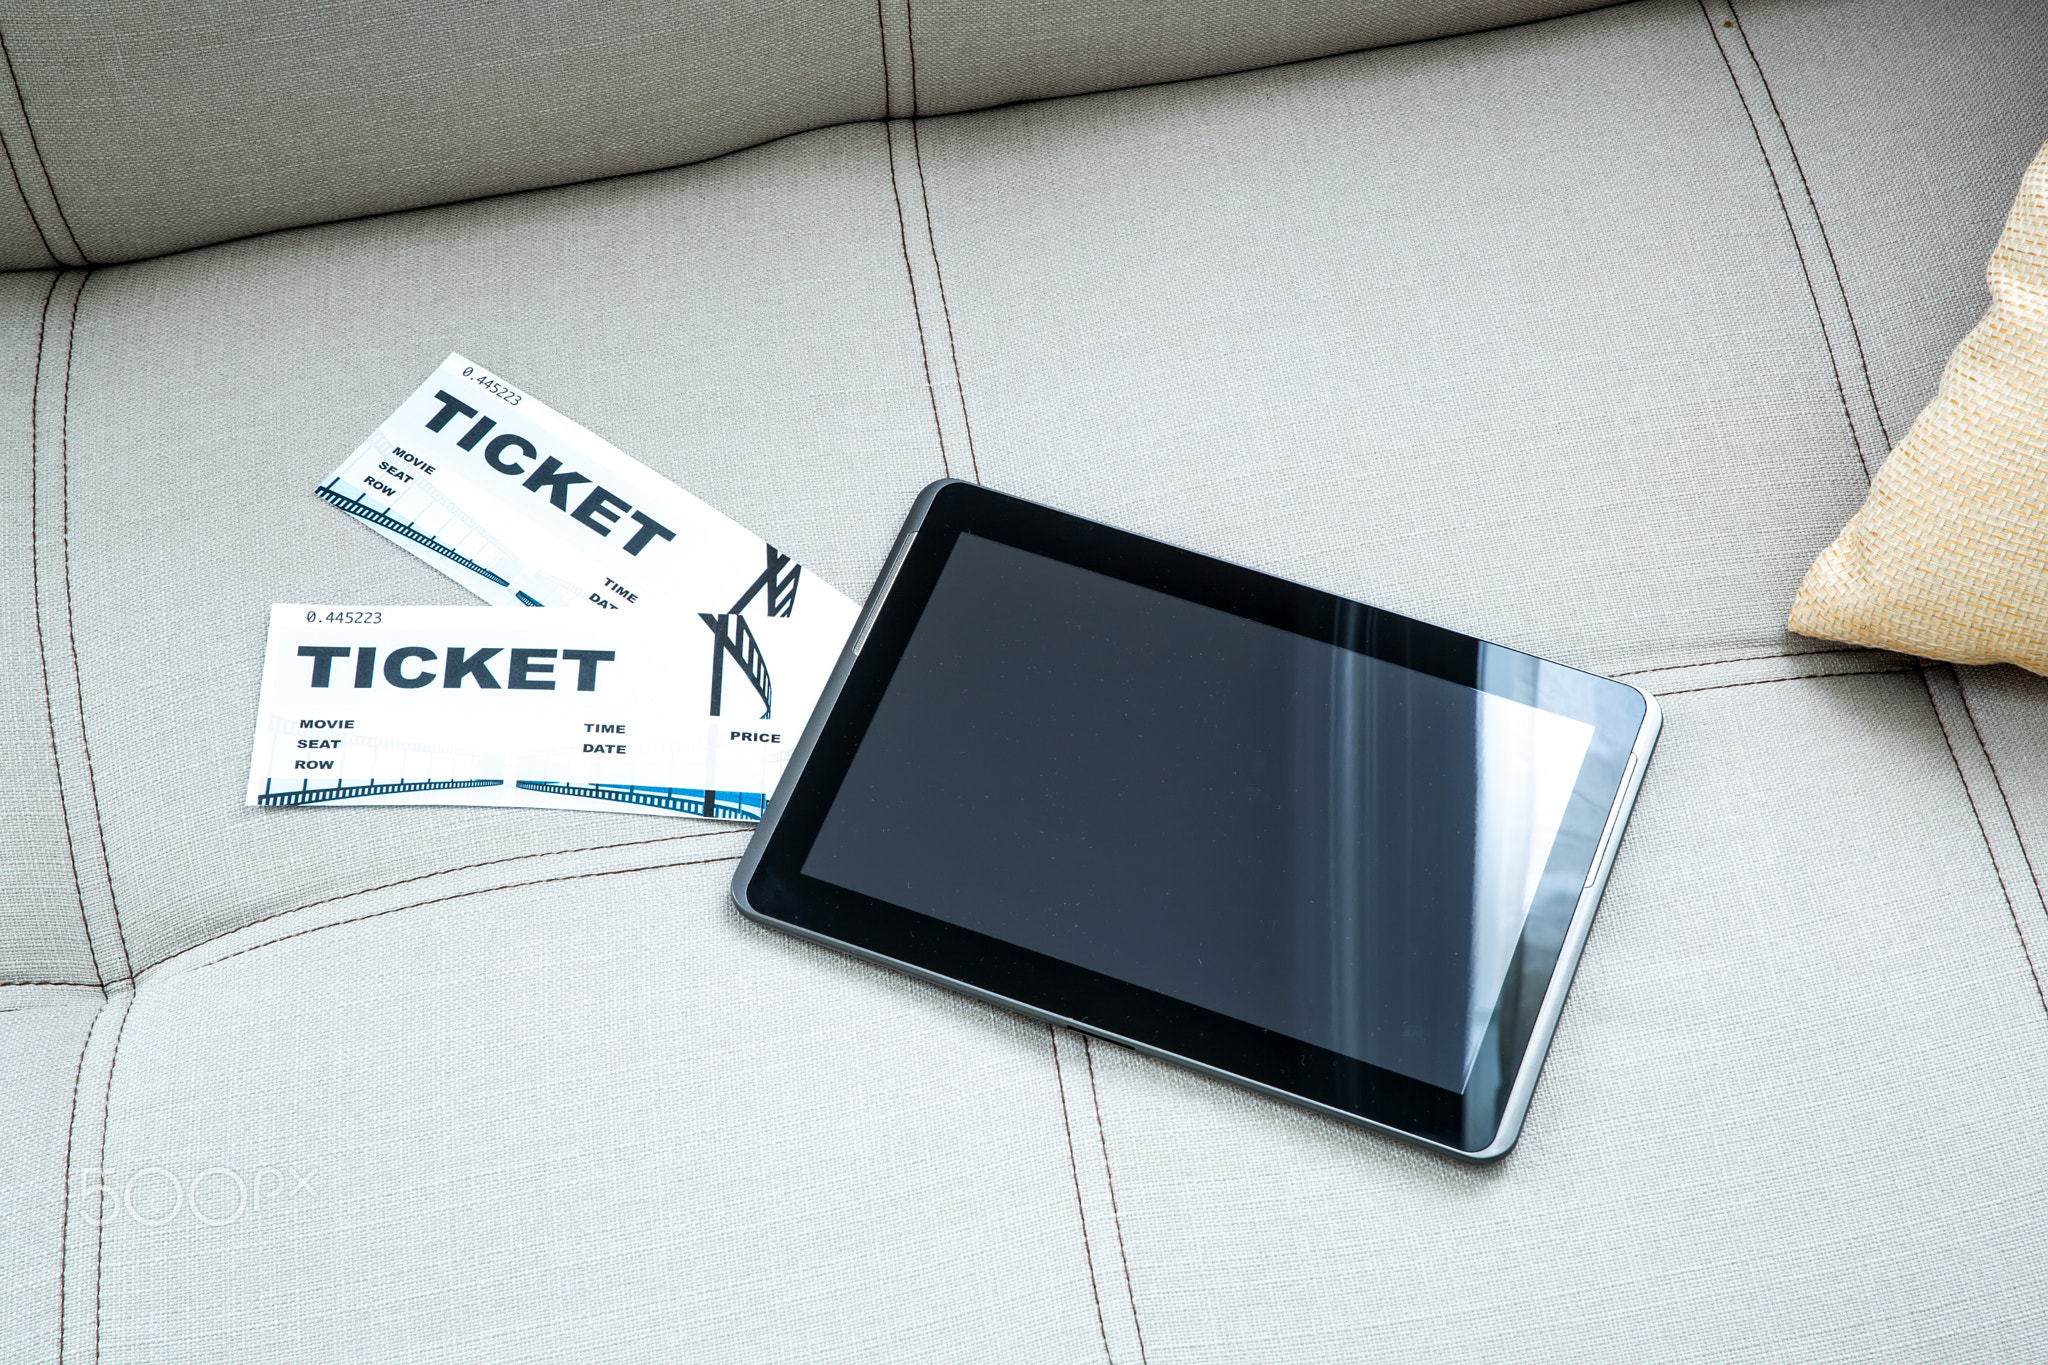 Buy Cinema Tickets online with a Tablet PC